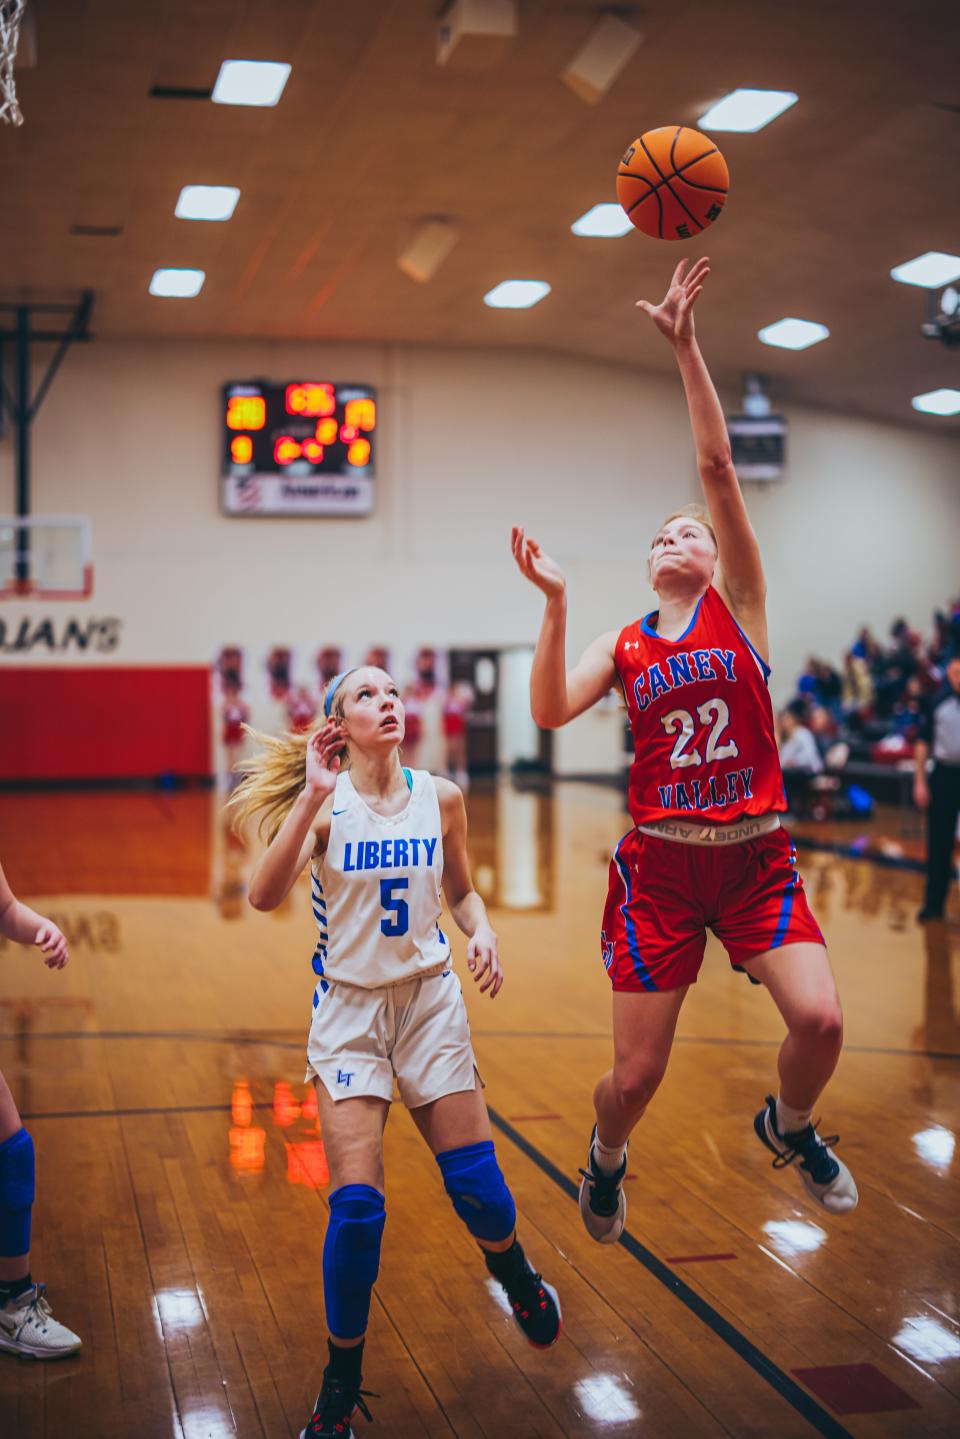 Caney Valley's Lauren Rutherford fights in the lane with Liberty's Jennika Boone during Thursday night's game.